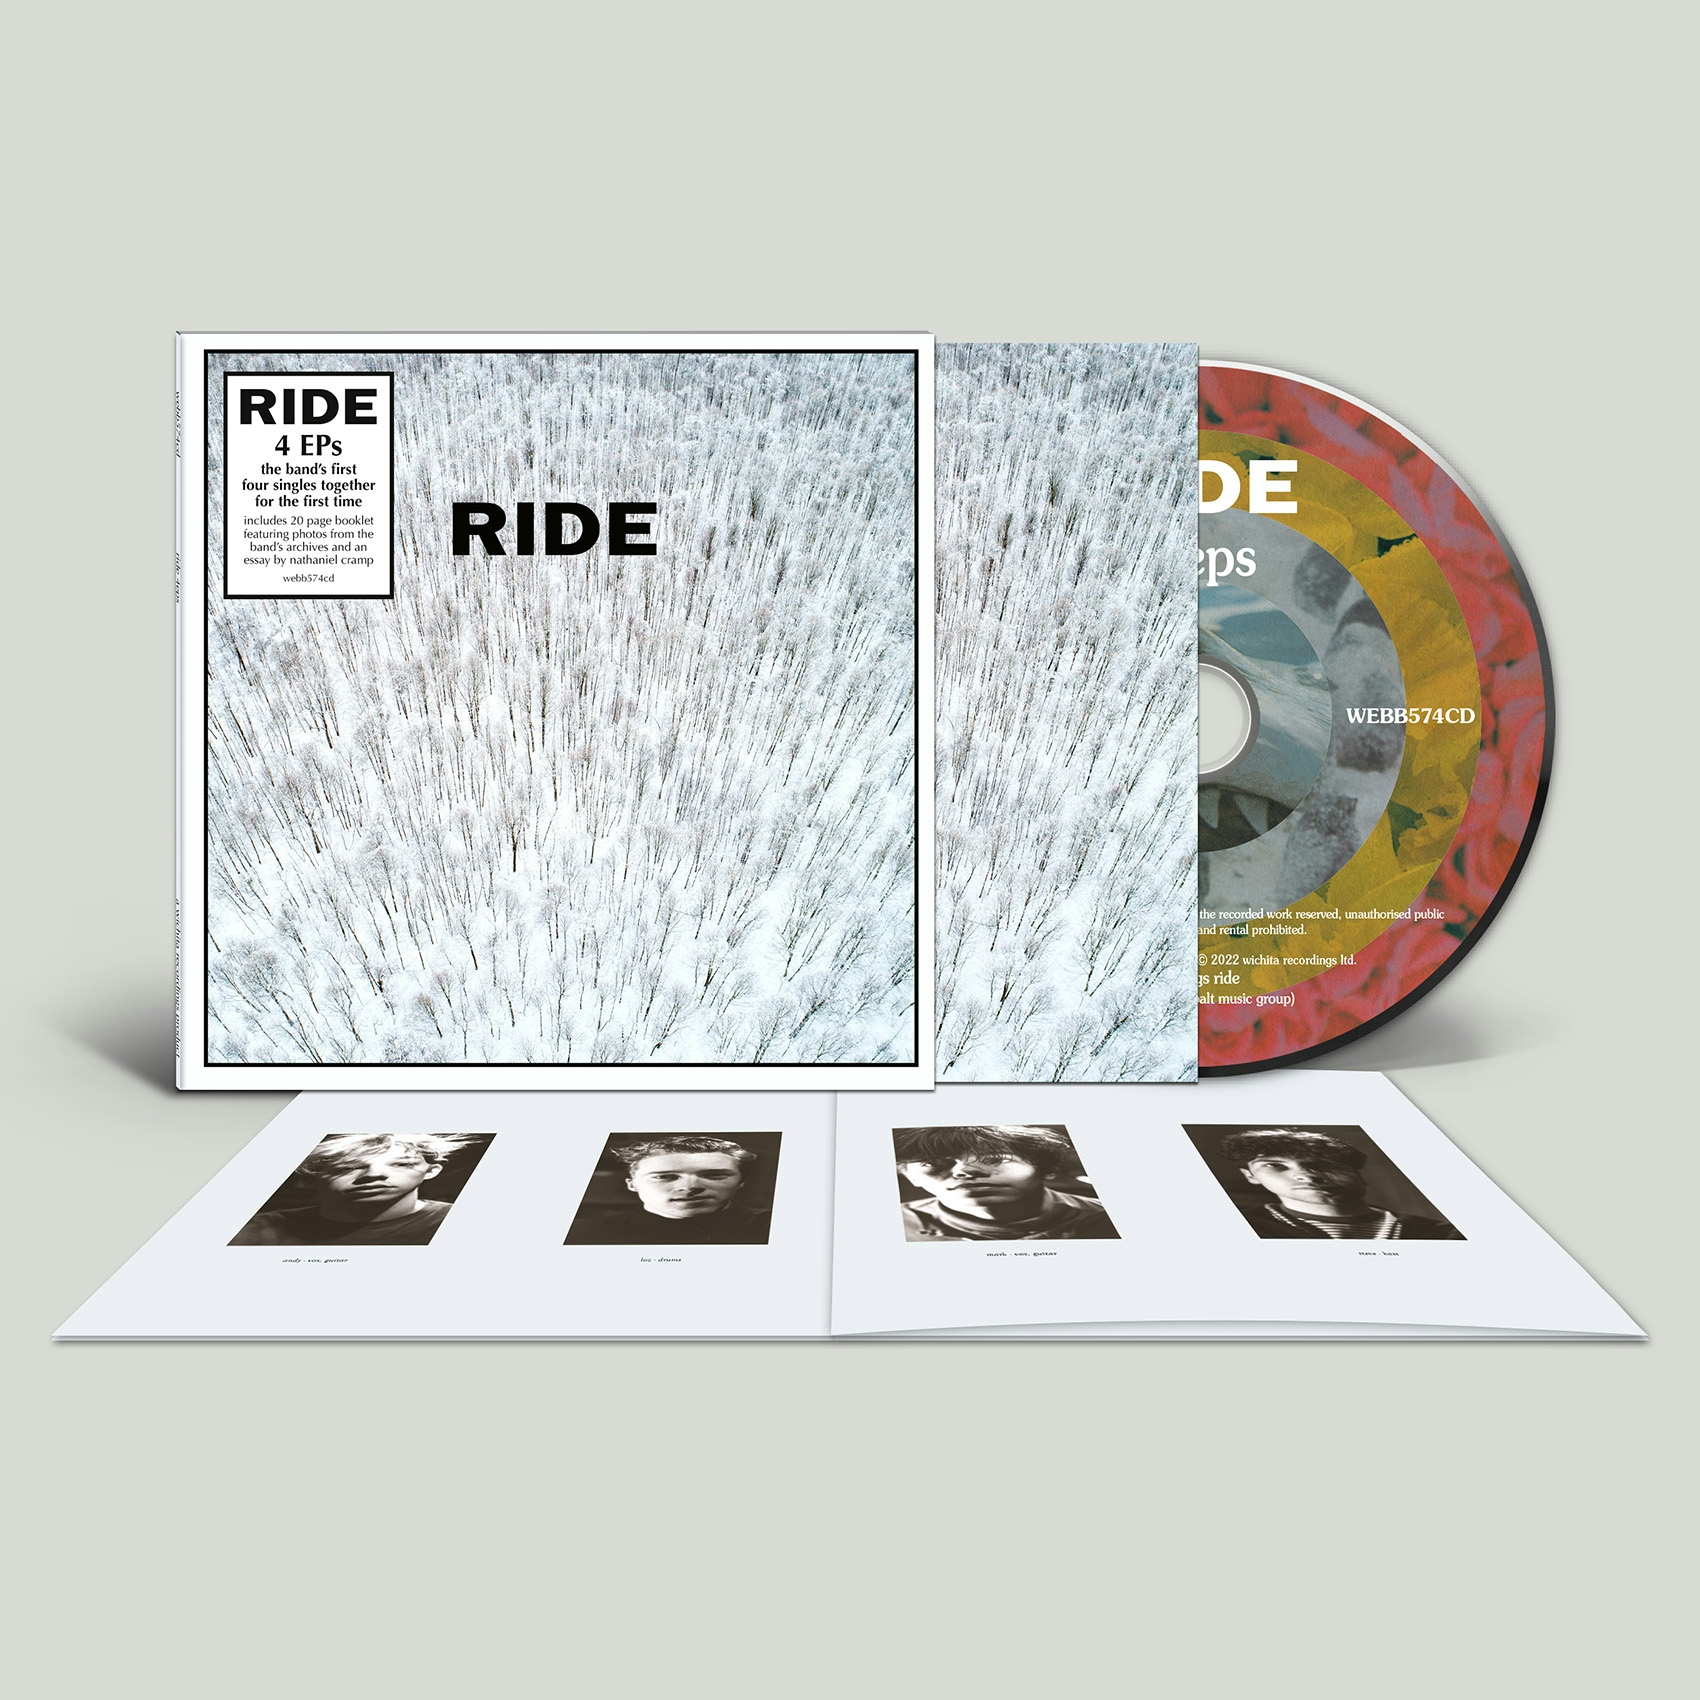 Album artwork for 4 EP's by Ride